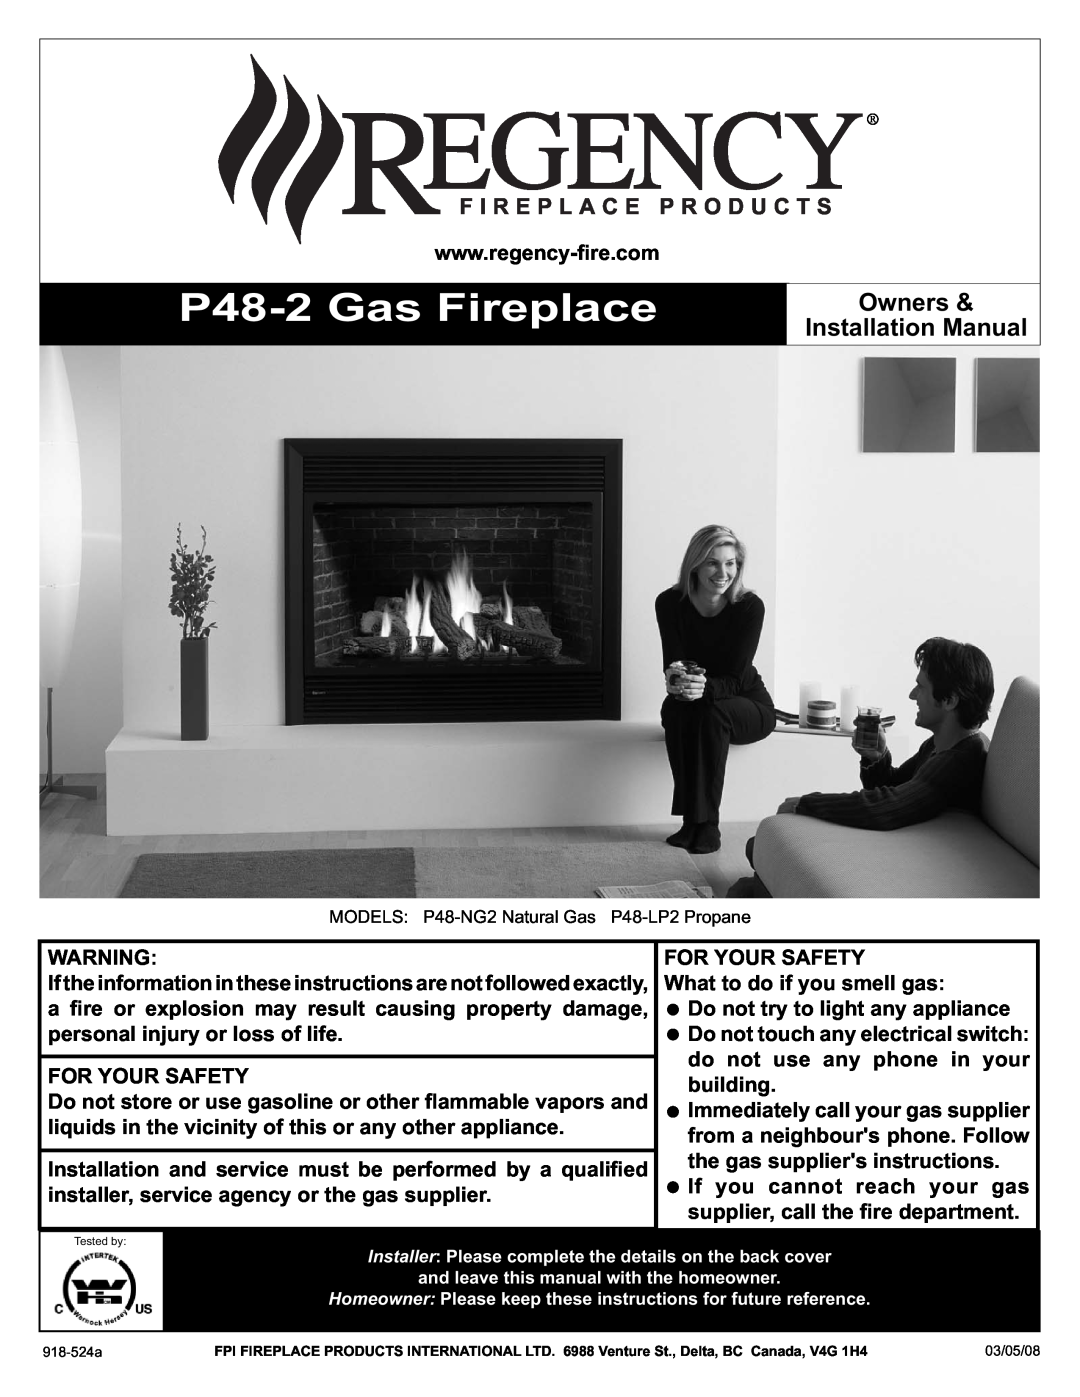 Regency installation manual P48-2Gas Fireplace, Owners, Installation Manual 